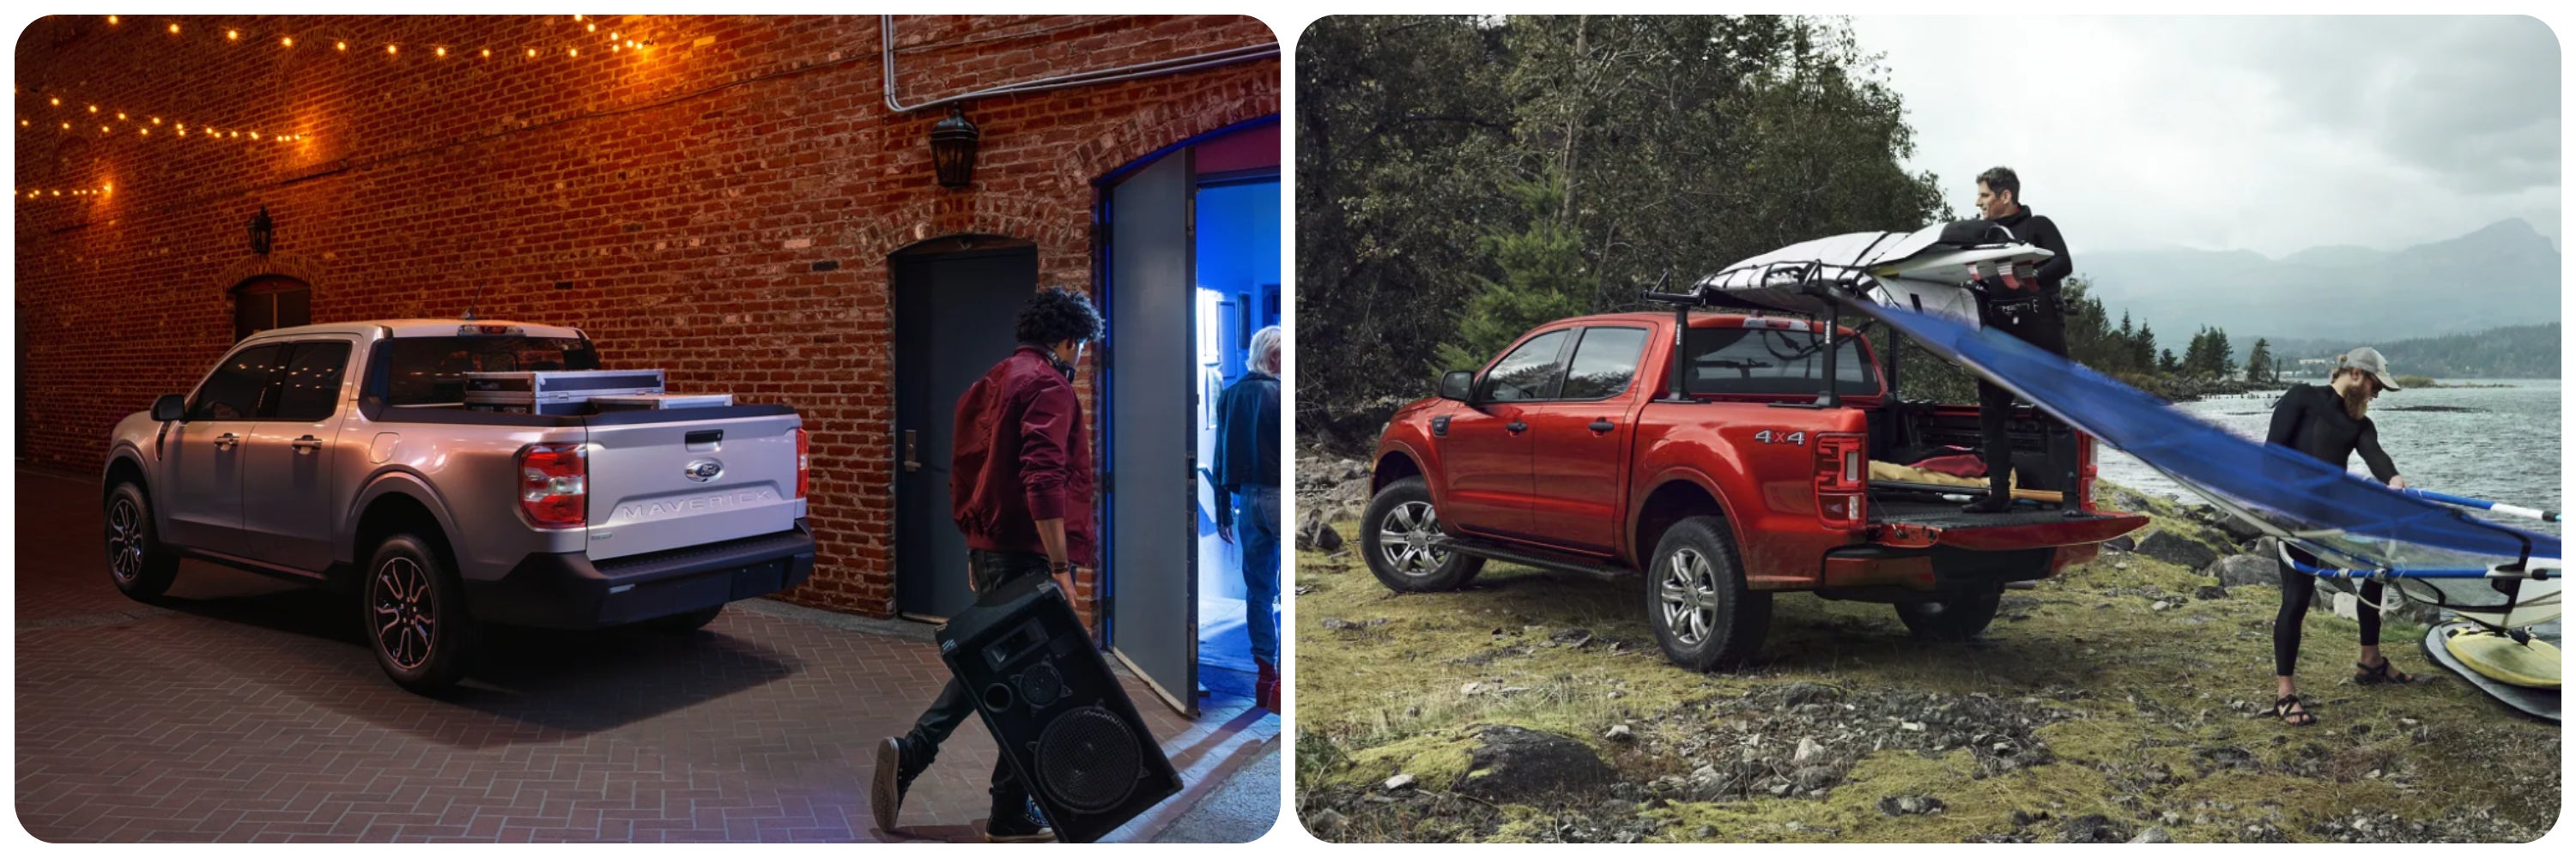 On the left, the back of a silver 2023 Ford Maverick parked behind a brick building, on the right a couple offloads a kayak and equipment from the back of a red 2023 Ford Ranger